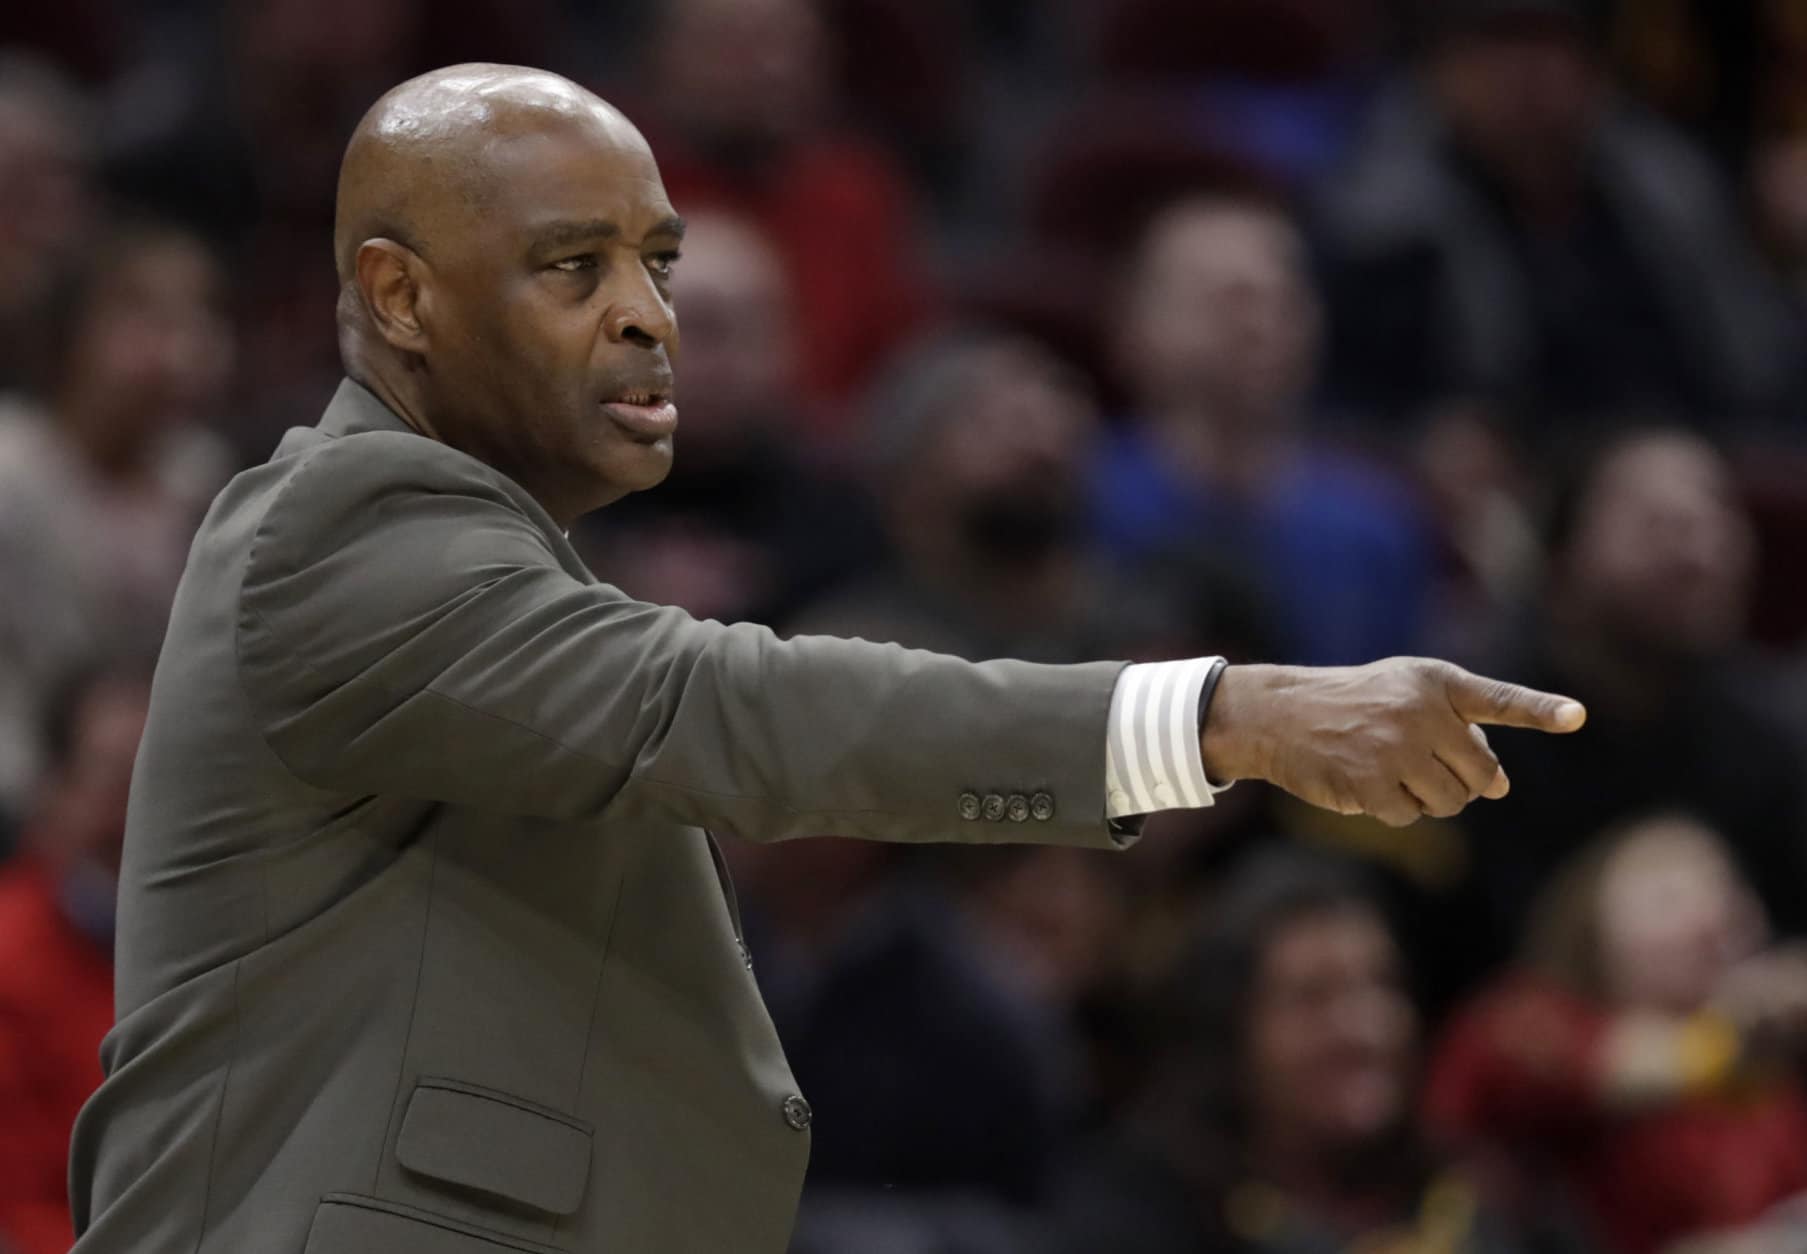 Cleveland Cavaliers coach Larry Drew yells instructions to players during the second half of the team's NBA basketball game against the Washington Wizards, Tuesday, Jan. 29, 2019, in Cleveland. The Cavaliers won 116-113. (AP Photo/Tony Dejak)